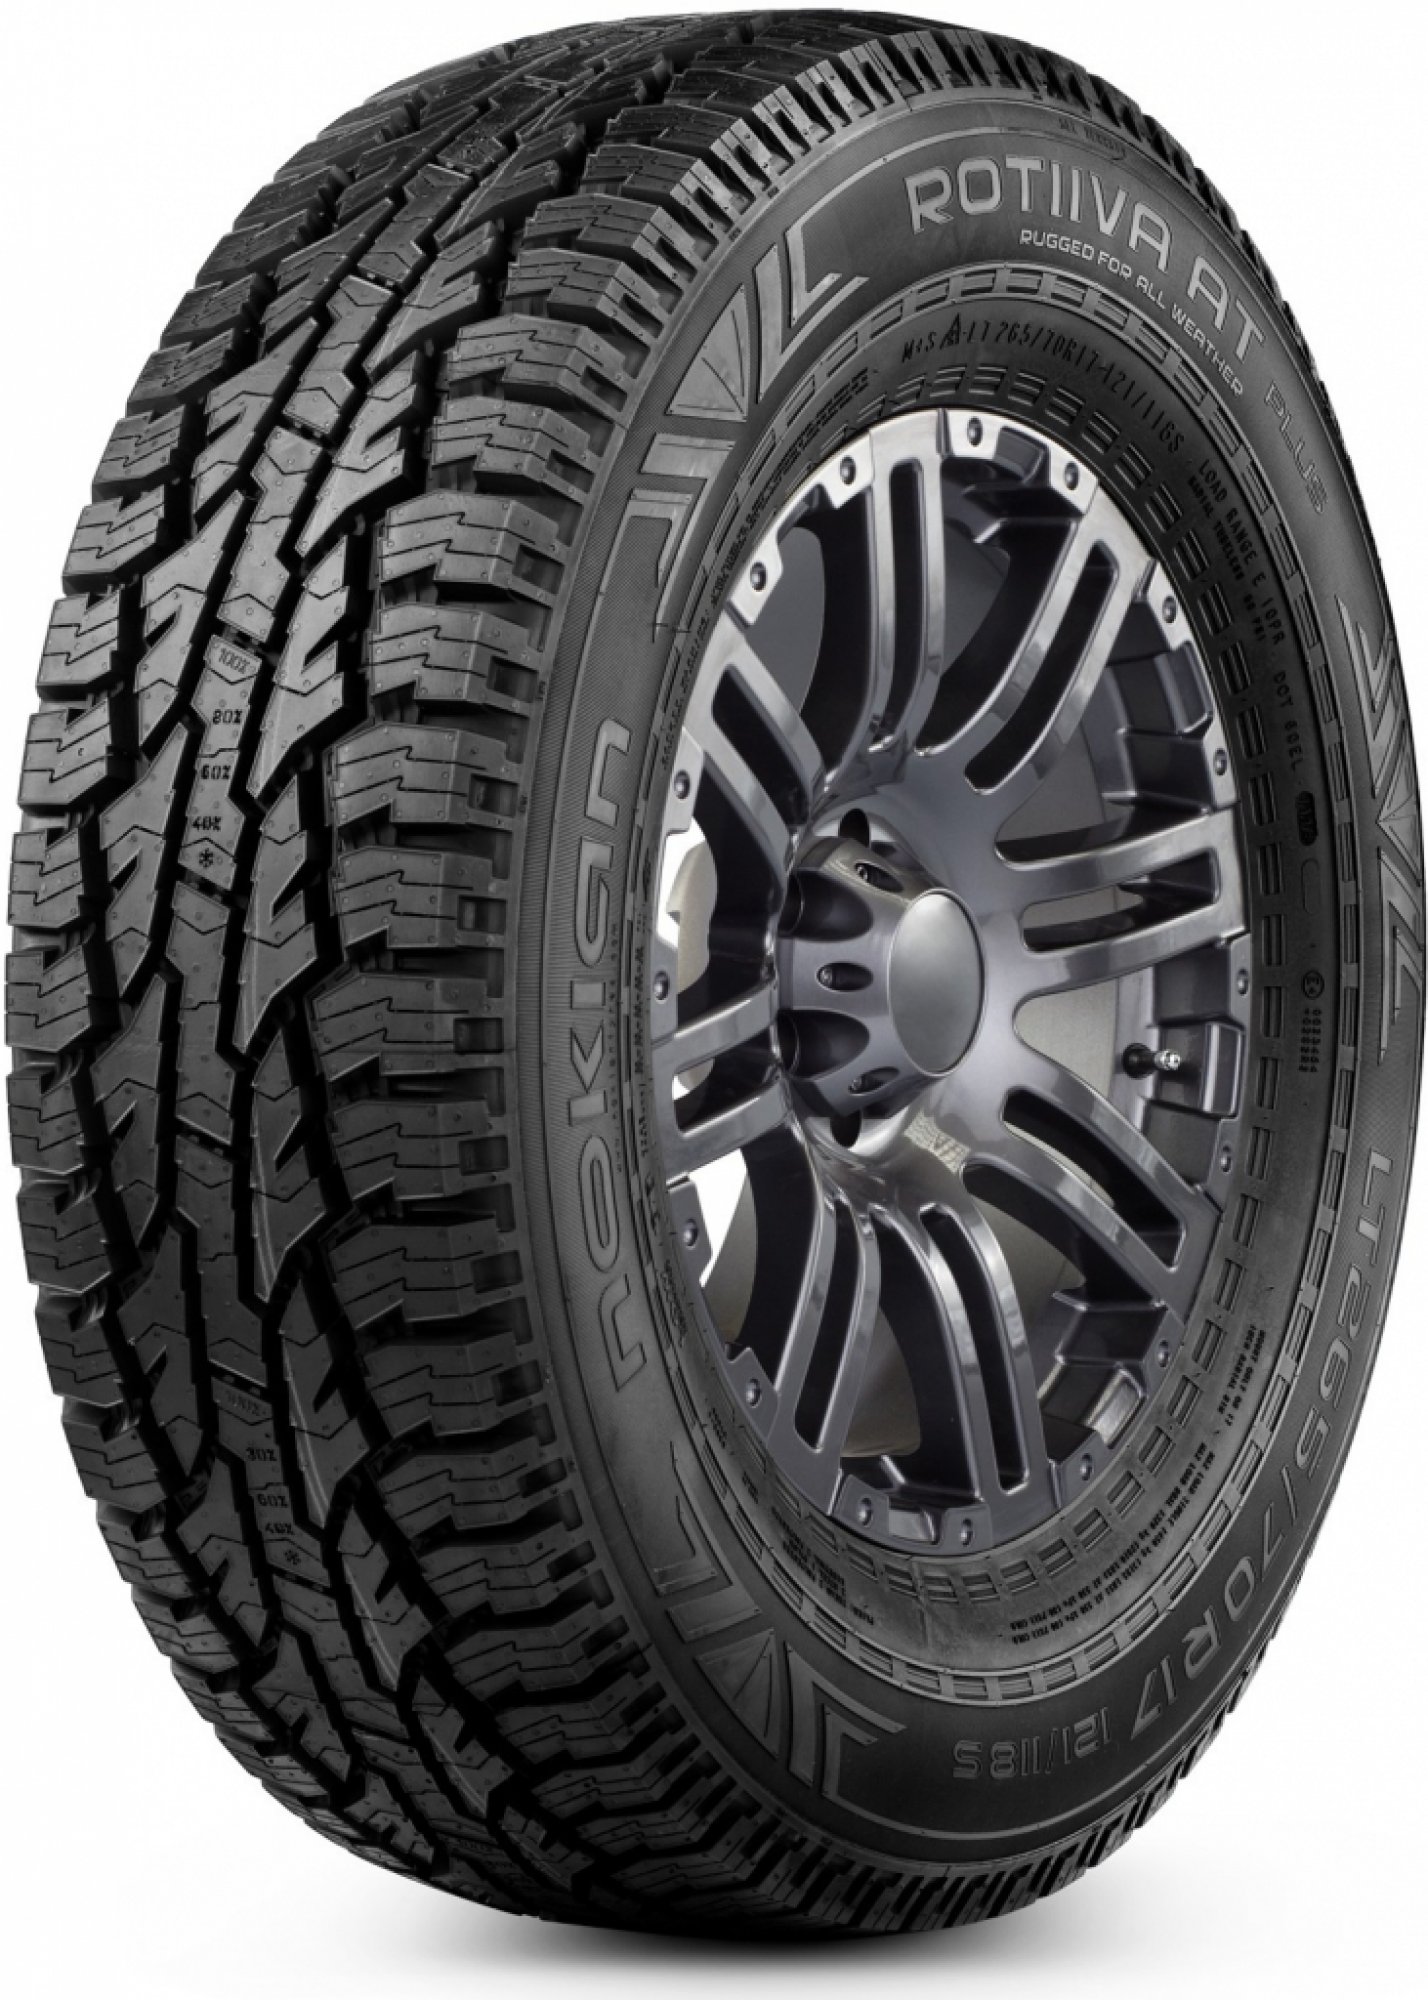 NOKIAN TYRES ROTIIVA AT PLUS 225/75 R 16 115/112S